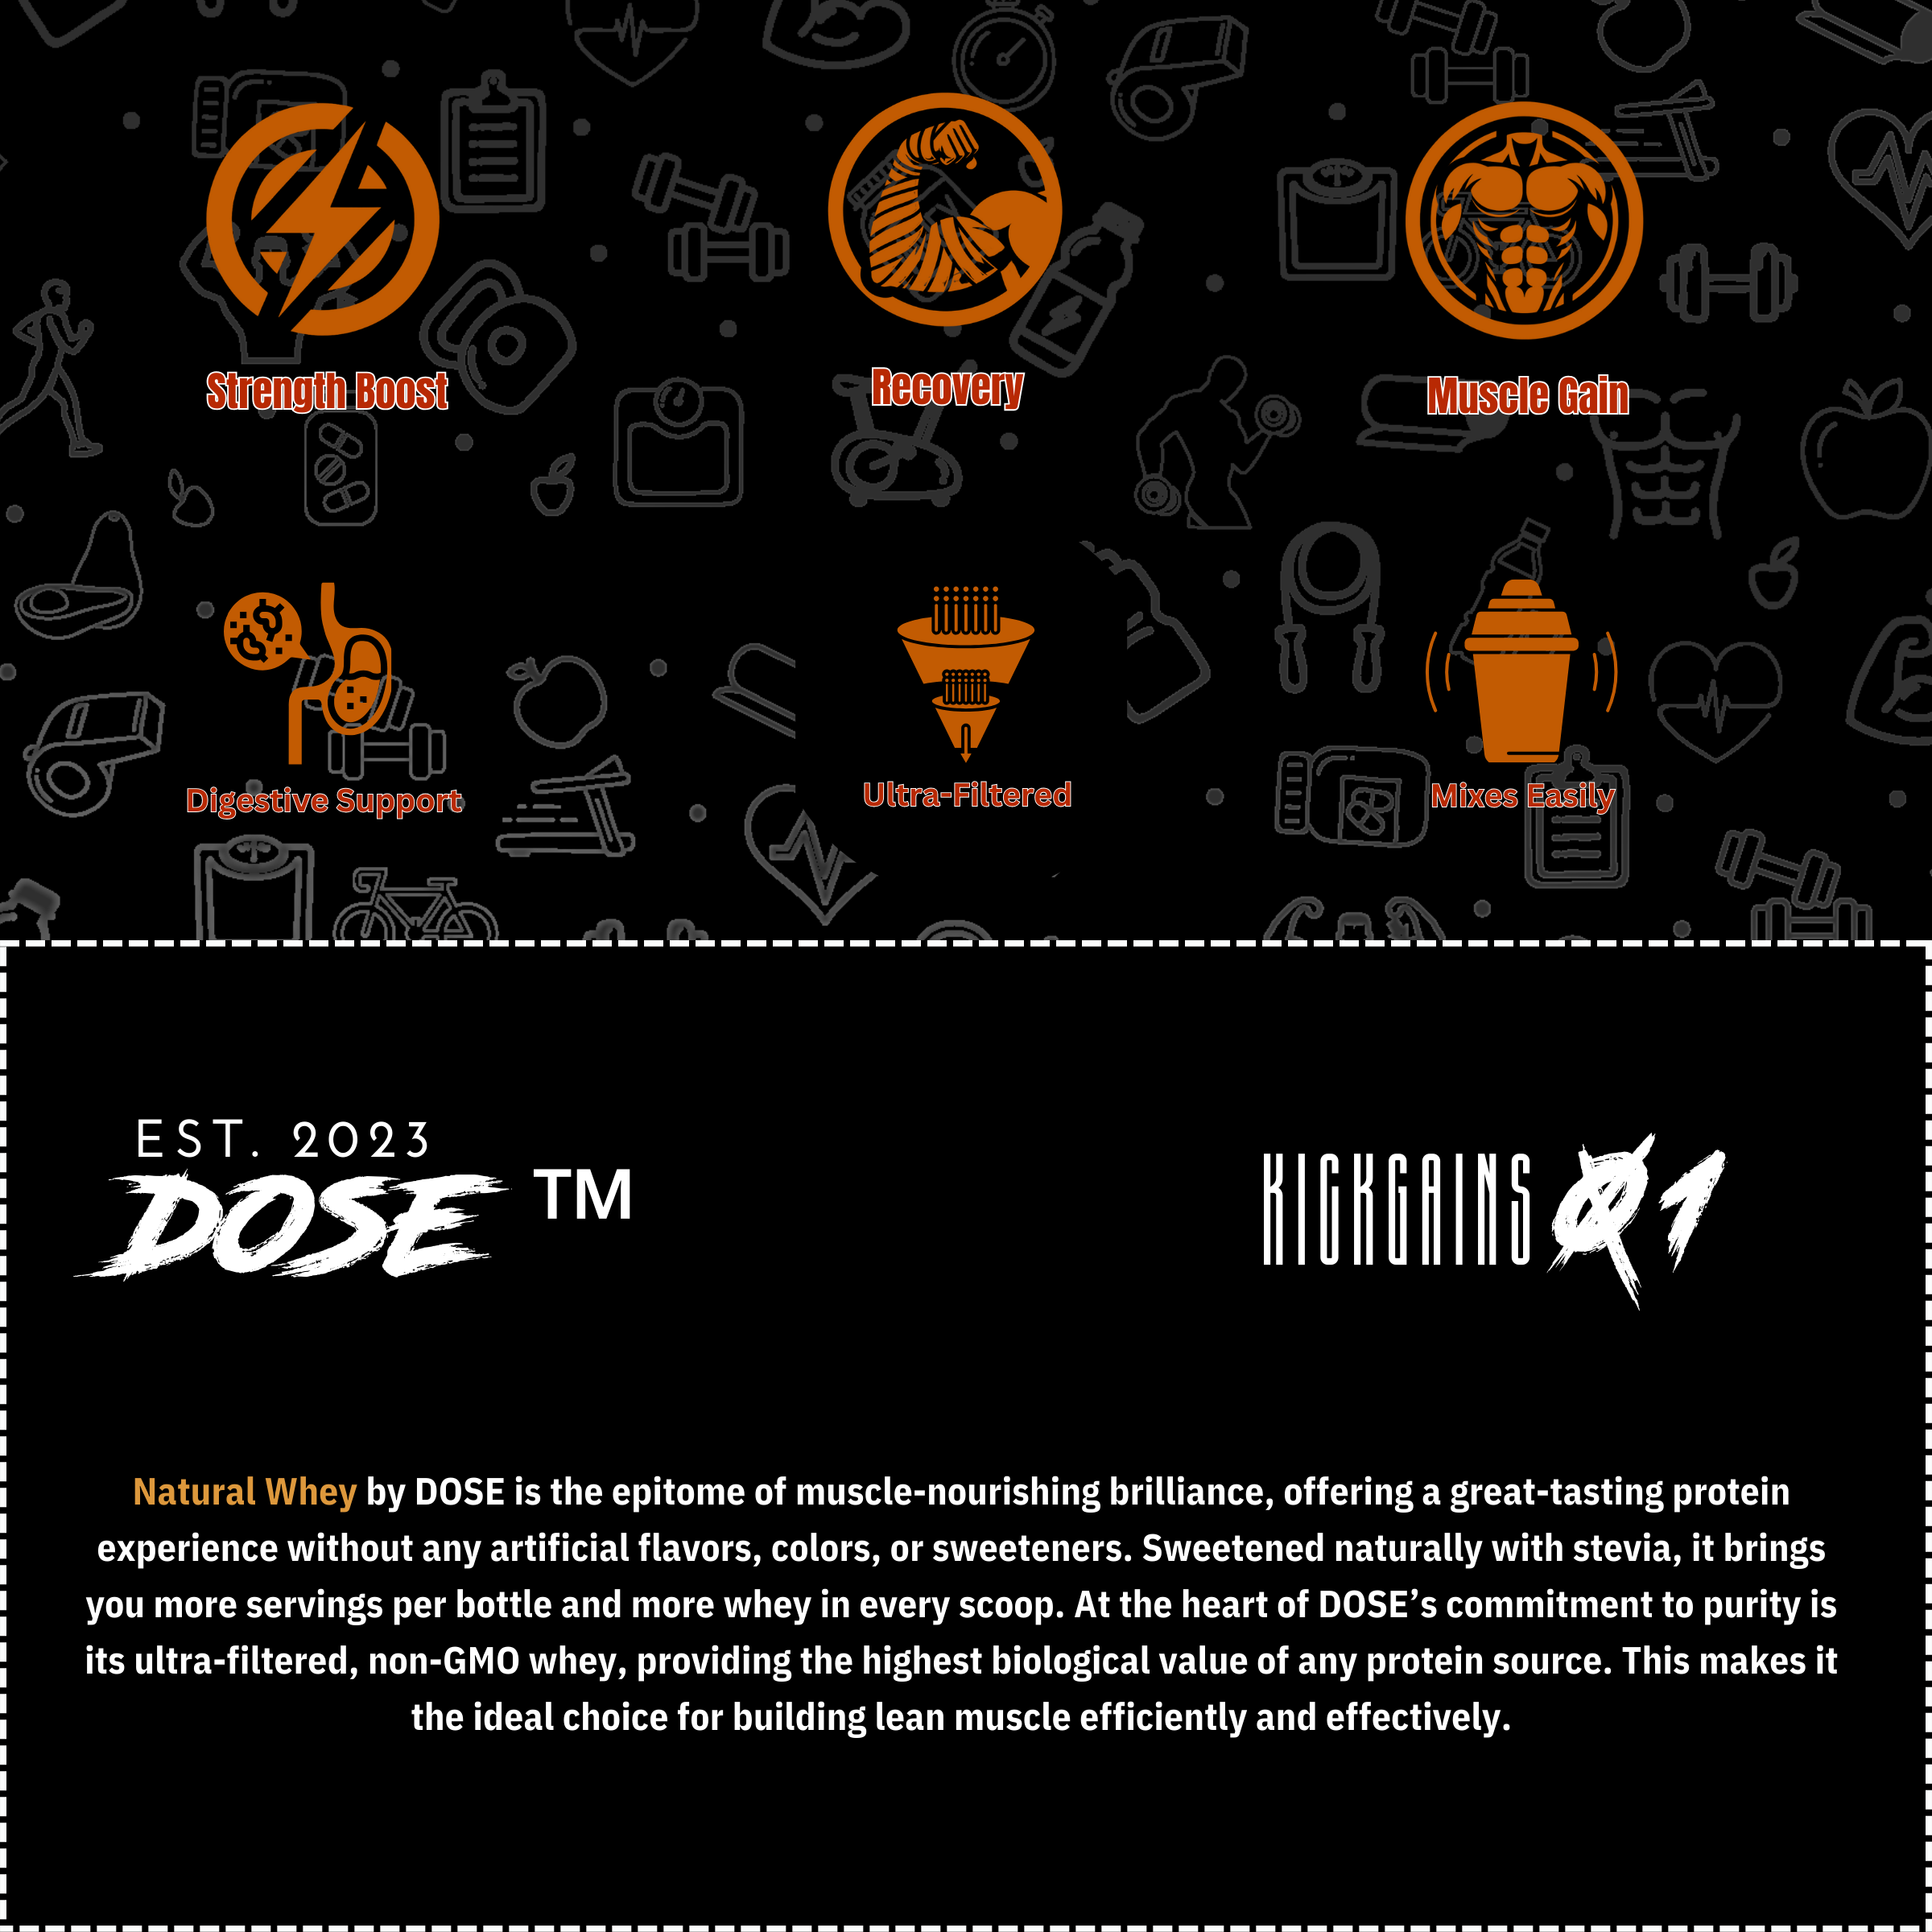 Dose Fuel Natural Whey Protein Benefits - Strength Boost, Recovery, Muscle Gain, Digestive Support, Ultra-Filtered, Mixes Easily. Natural, Non-GMO Whey for Building Lean Muscle